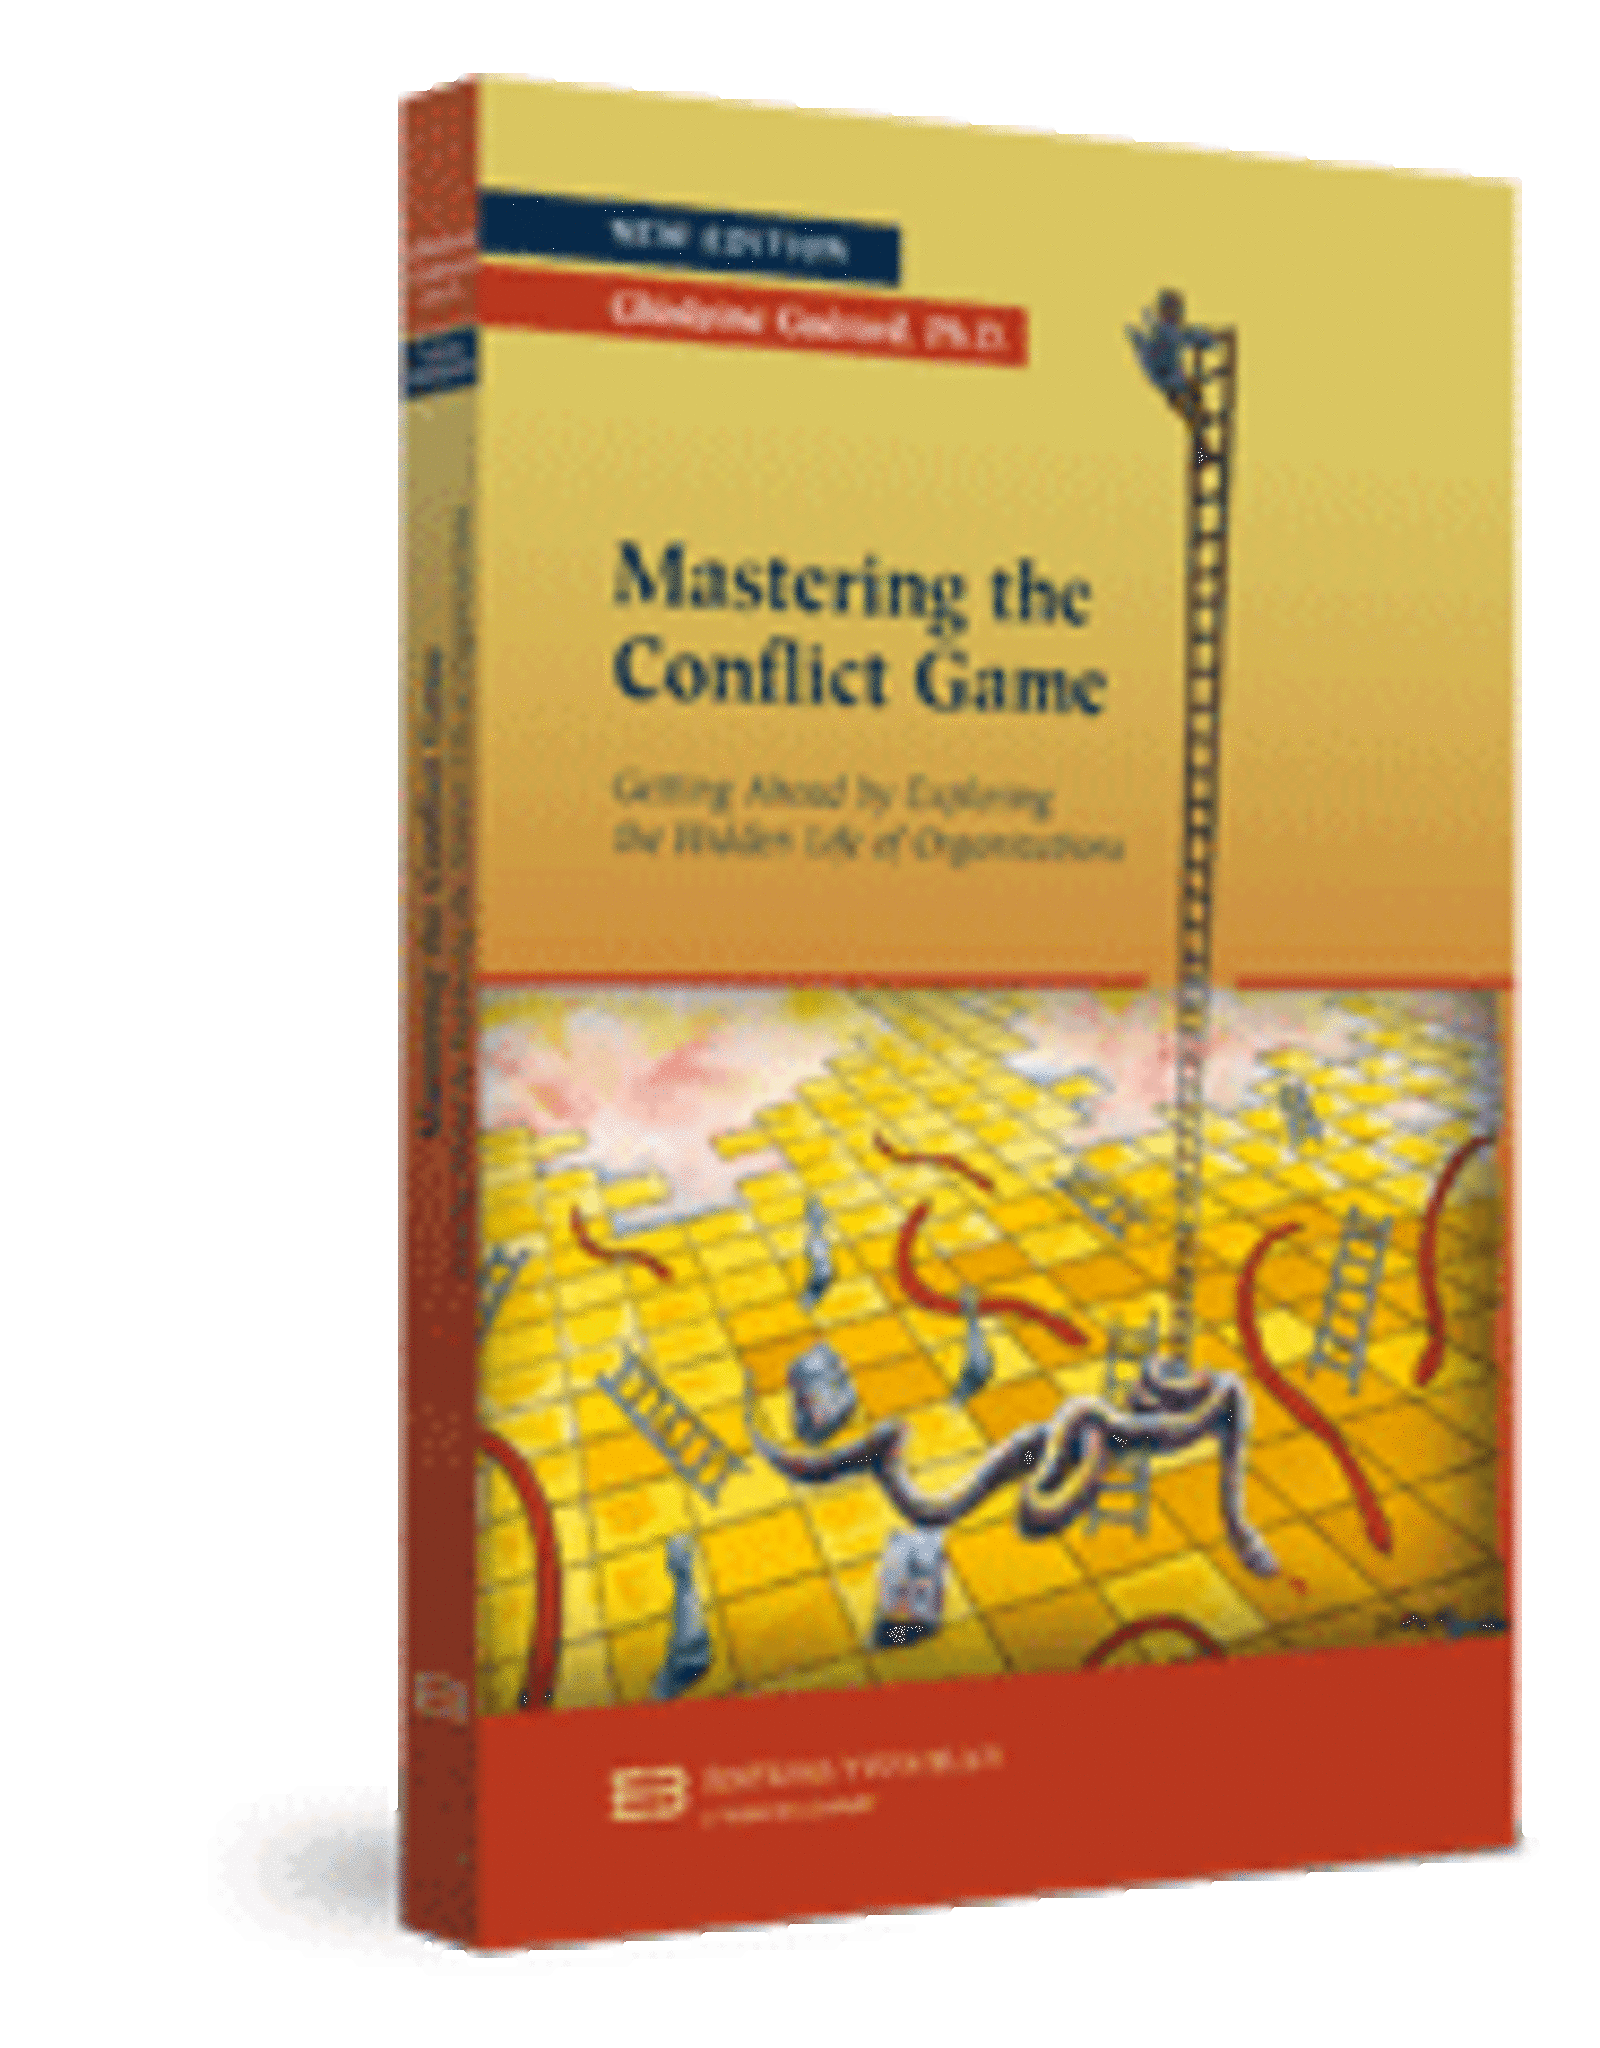 Textbook Mastering the Conflict Game + CD